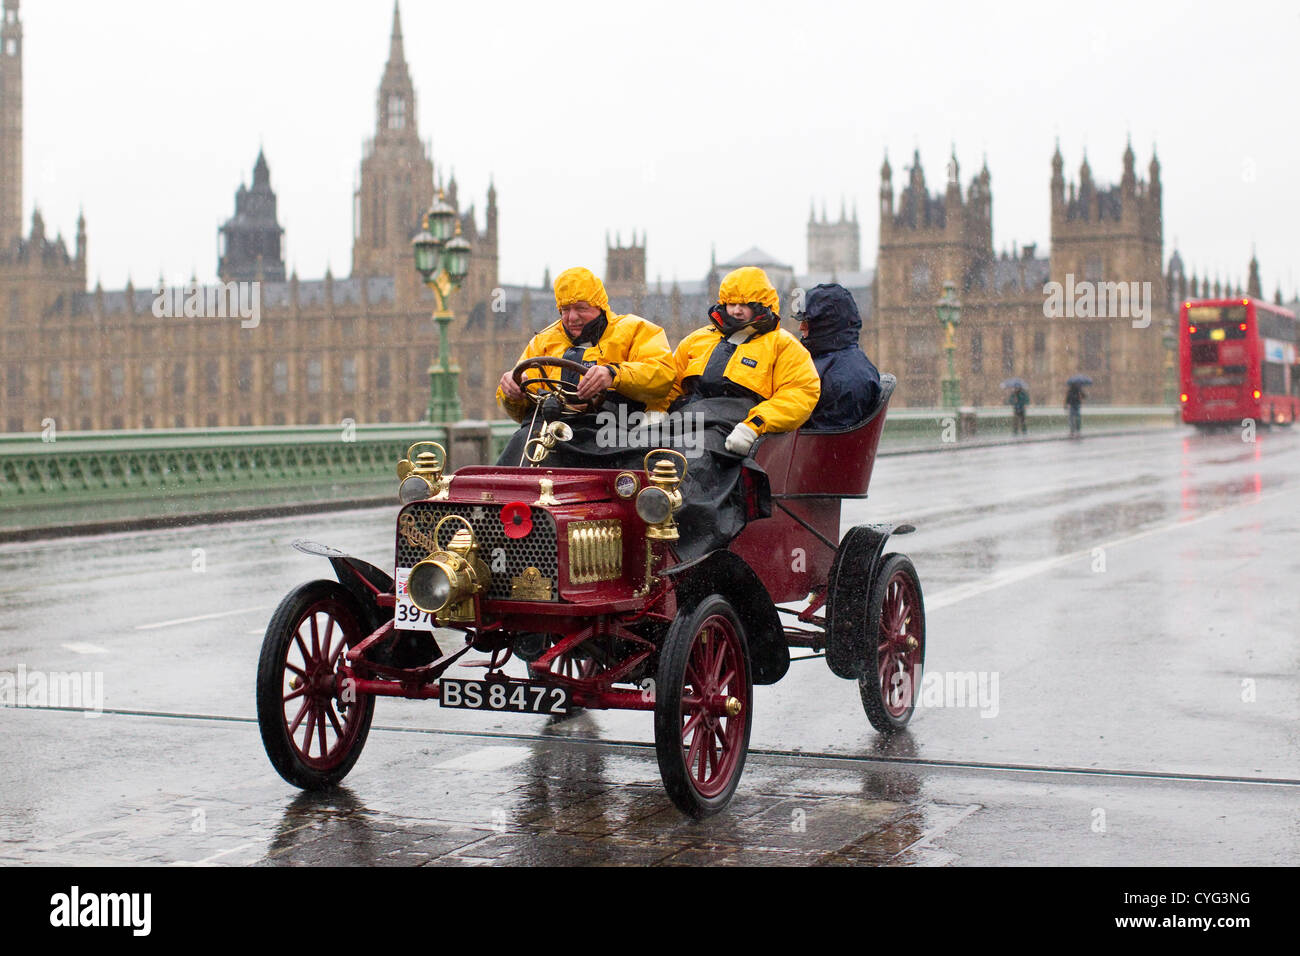 Royal Automobile Club's annual Veteran Car Run London to Brighton. 04.11.2012 Picture shows No.397 a 1904 Rambler driven in wet conditions by Alan Hollett crossing Westminster Bridge, one of many classic vehicles taking part in this years London to Brighton Veteran Car Run 2012 starting at Hyde Park in Central London and finishing at the seafront on the Sussex resort of Brighton. Stock Photo